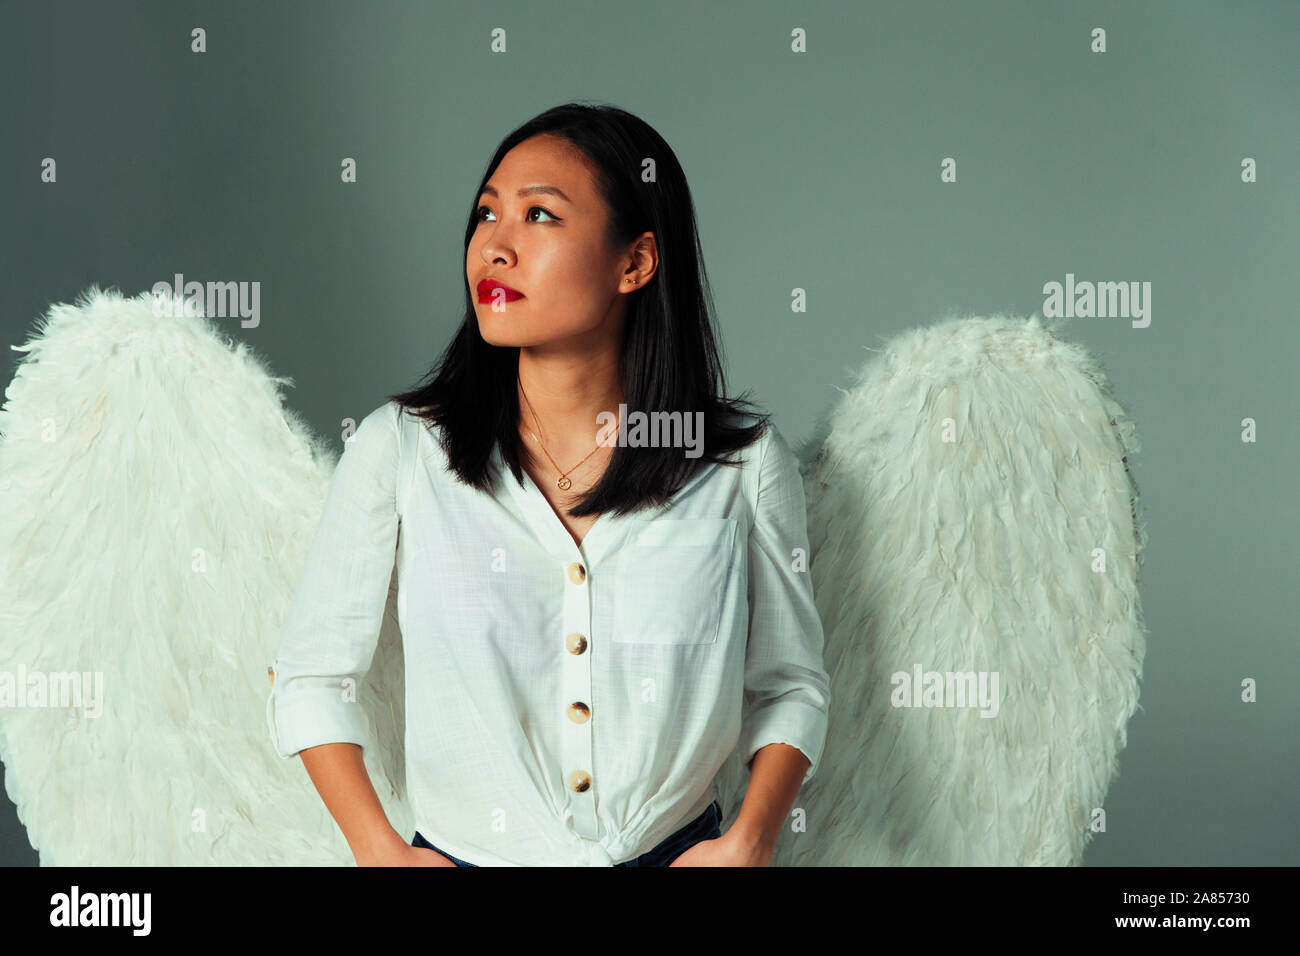 Serene, curious young woman wearing angel wings Stock Photo